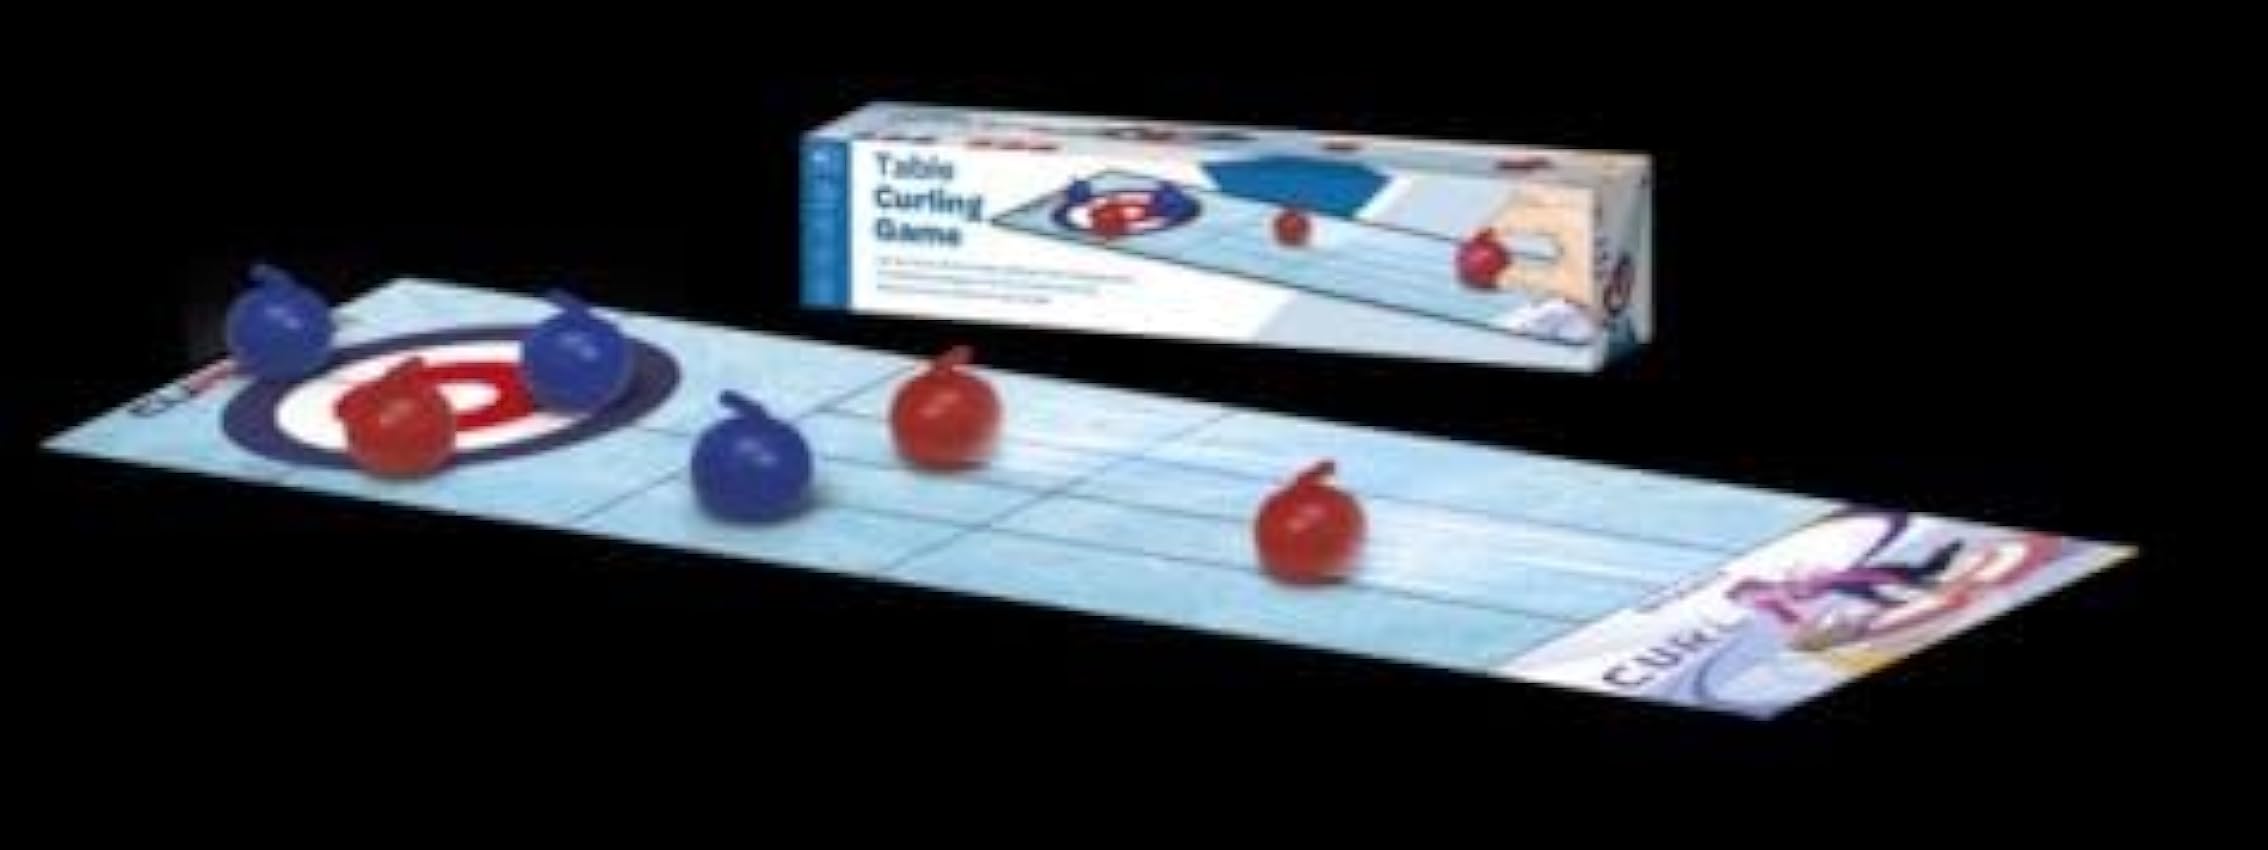 The Game Factory - Table Curling Game (207015) fnL3kyHw